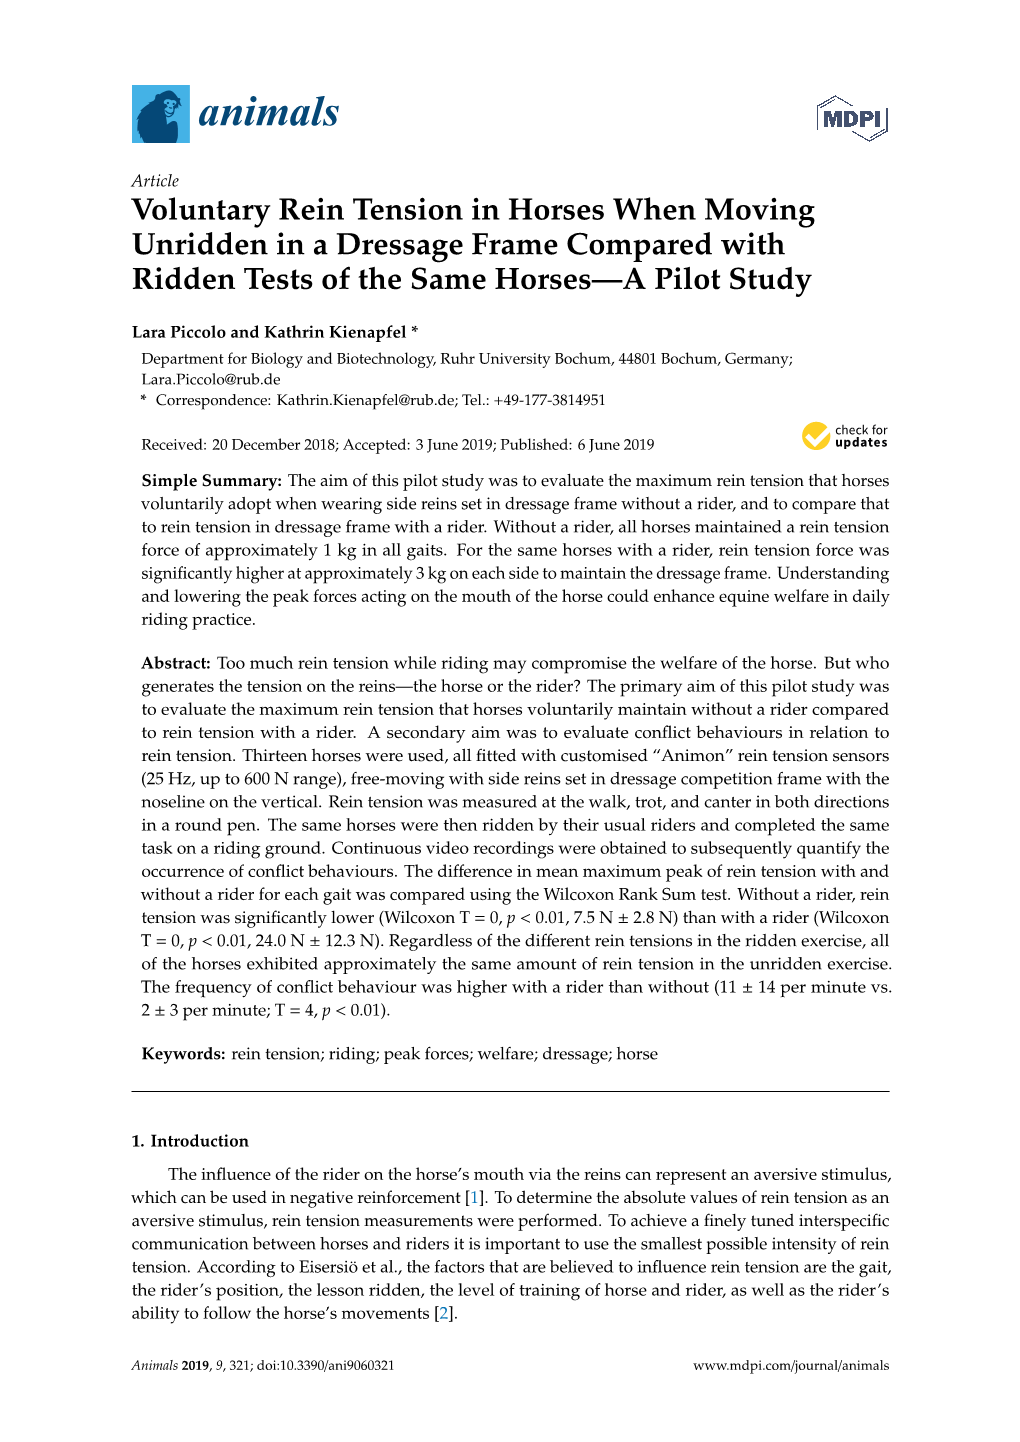 Voluntary Rein Tension in Horses When Moving Unridden in a Dressage Frame Compared with Ridden Tests of the Same Horses—A Pilot Study